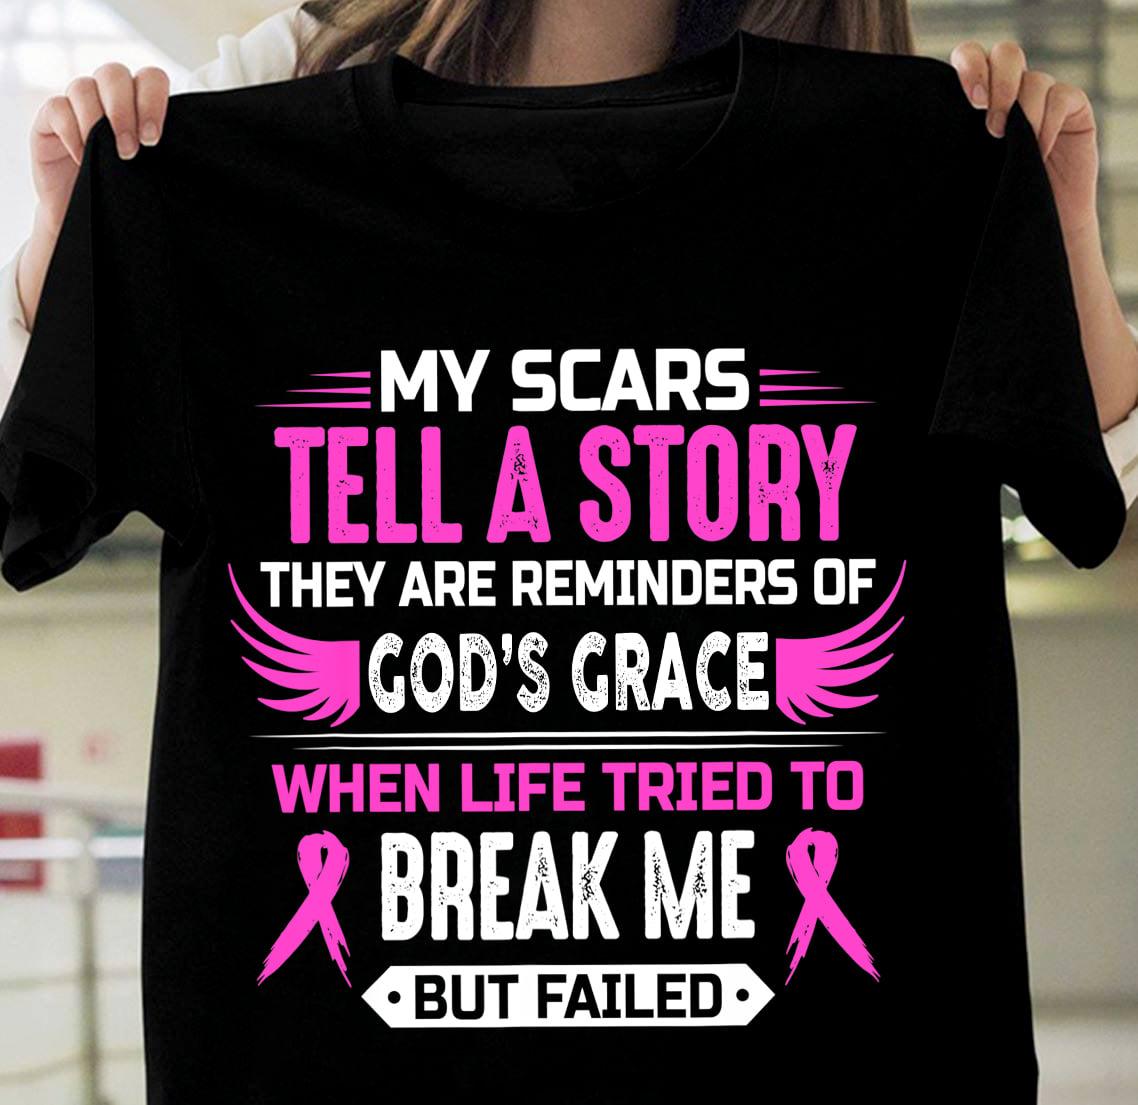 Breast Cancer Awareness - My scars tell a story they are reminders of god's grace when life tried to break me but failed